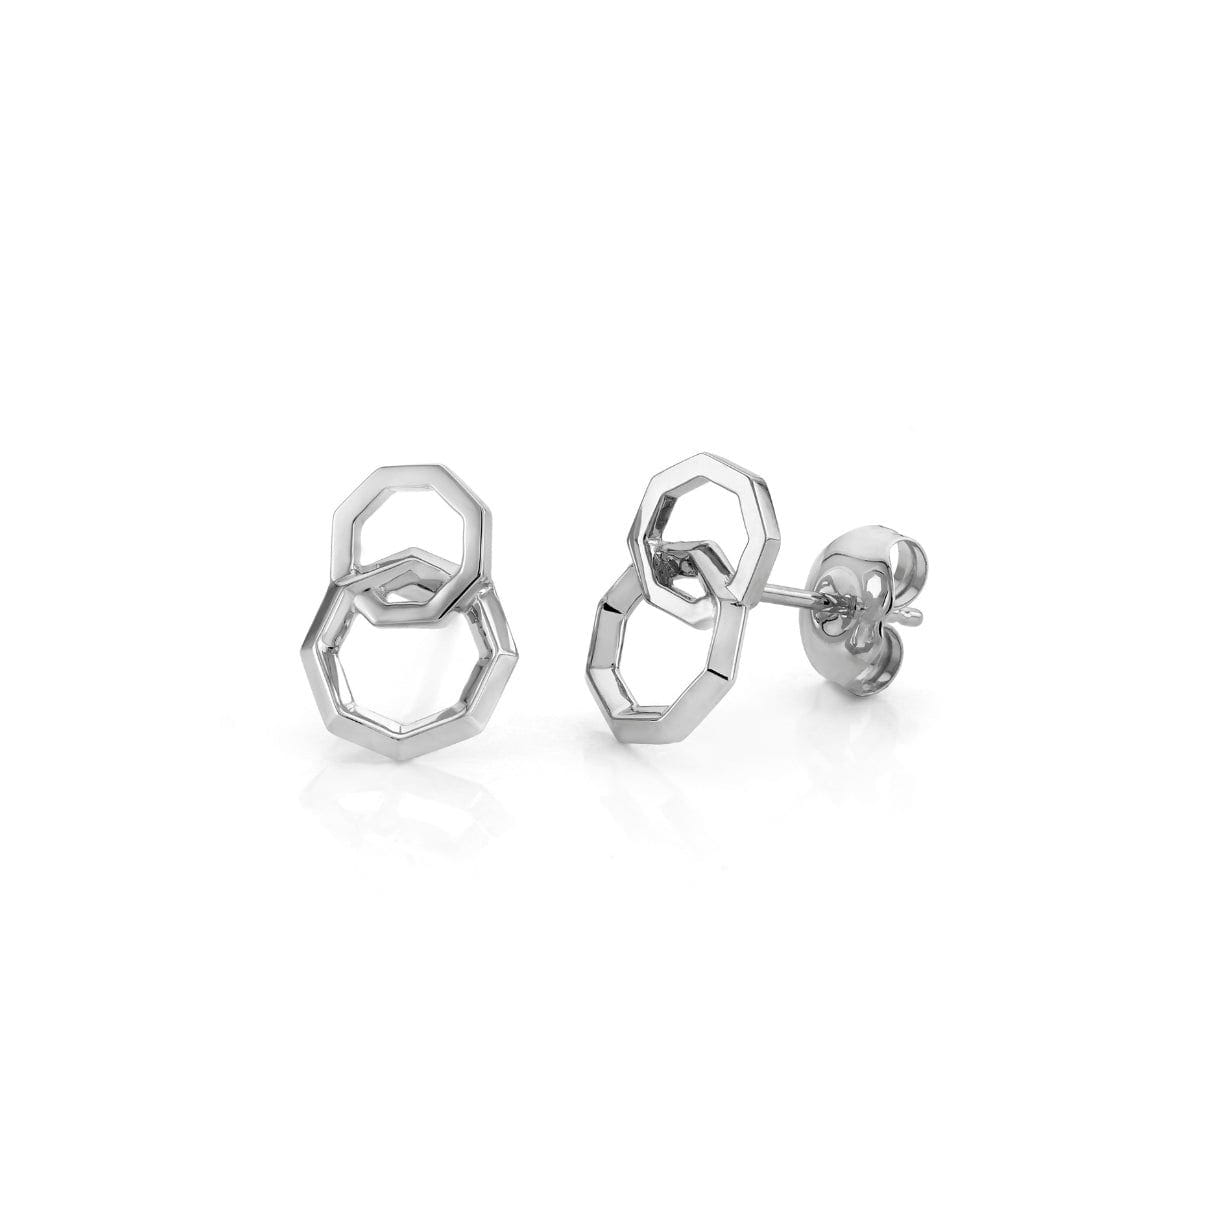 MICHAEL M Fashion Rings 14K White Gold Double Octave Earrings